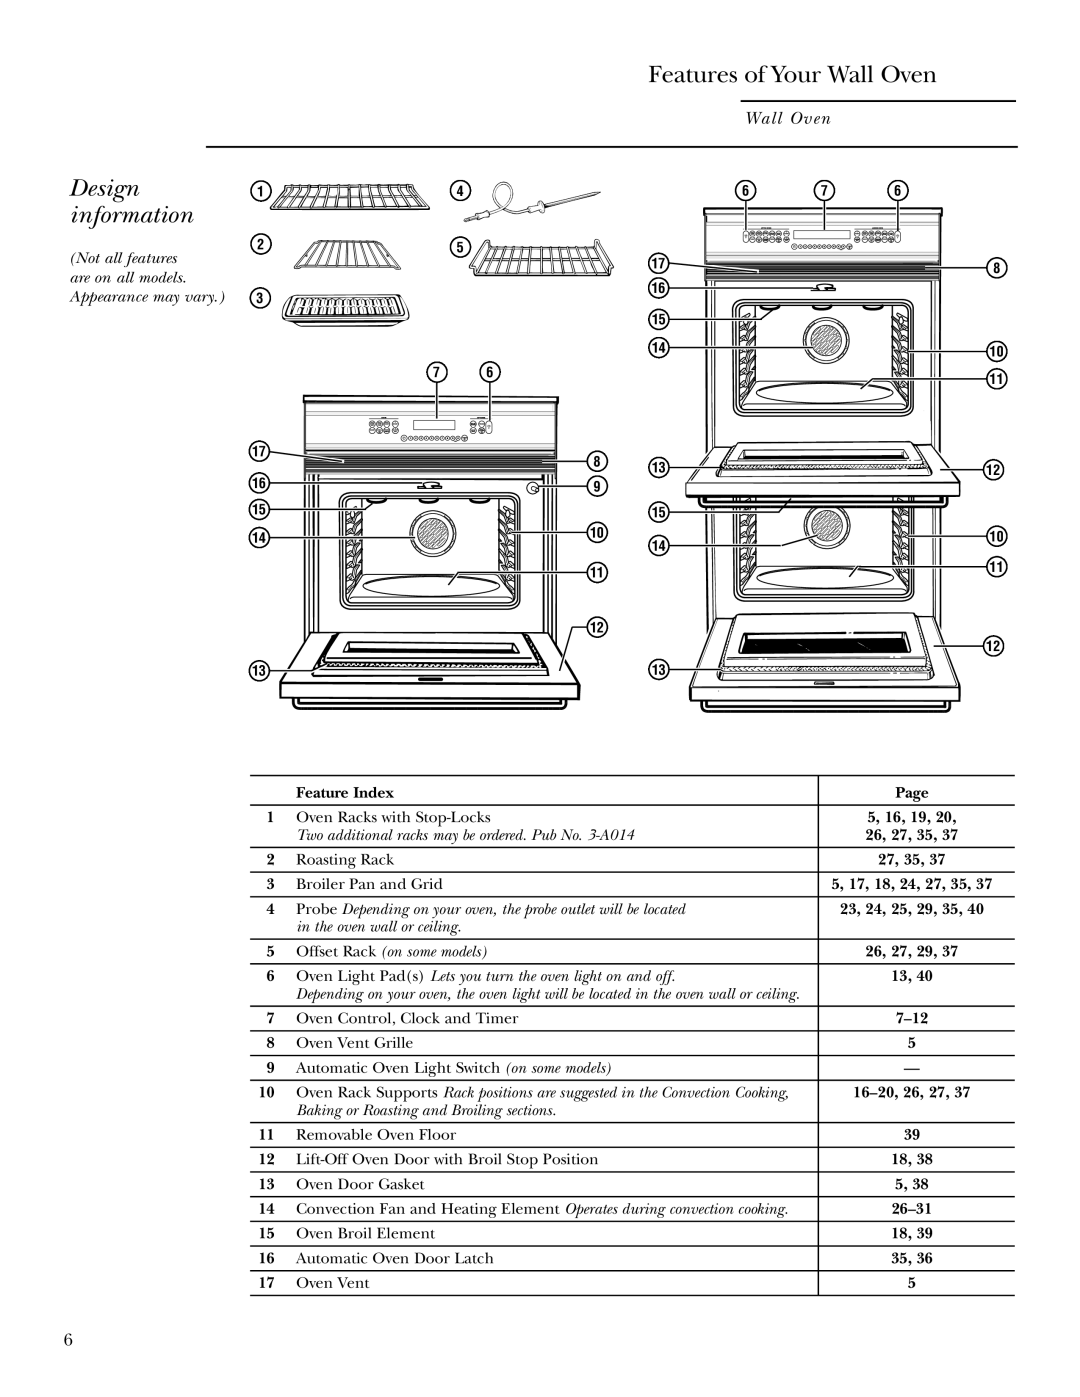 GE ZEK958, ZEK938 Features of Your Wall Oven, Design information, Not all features are on all models. Appearance may vary 